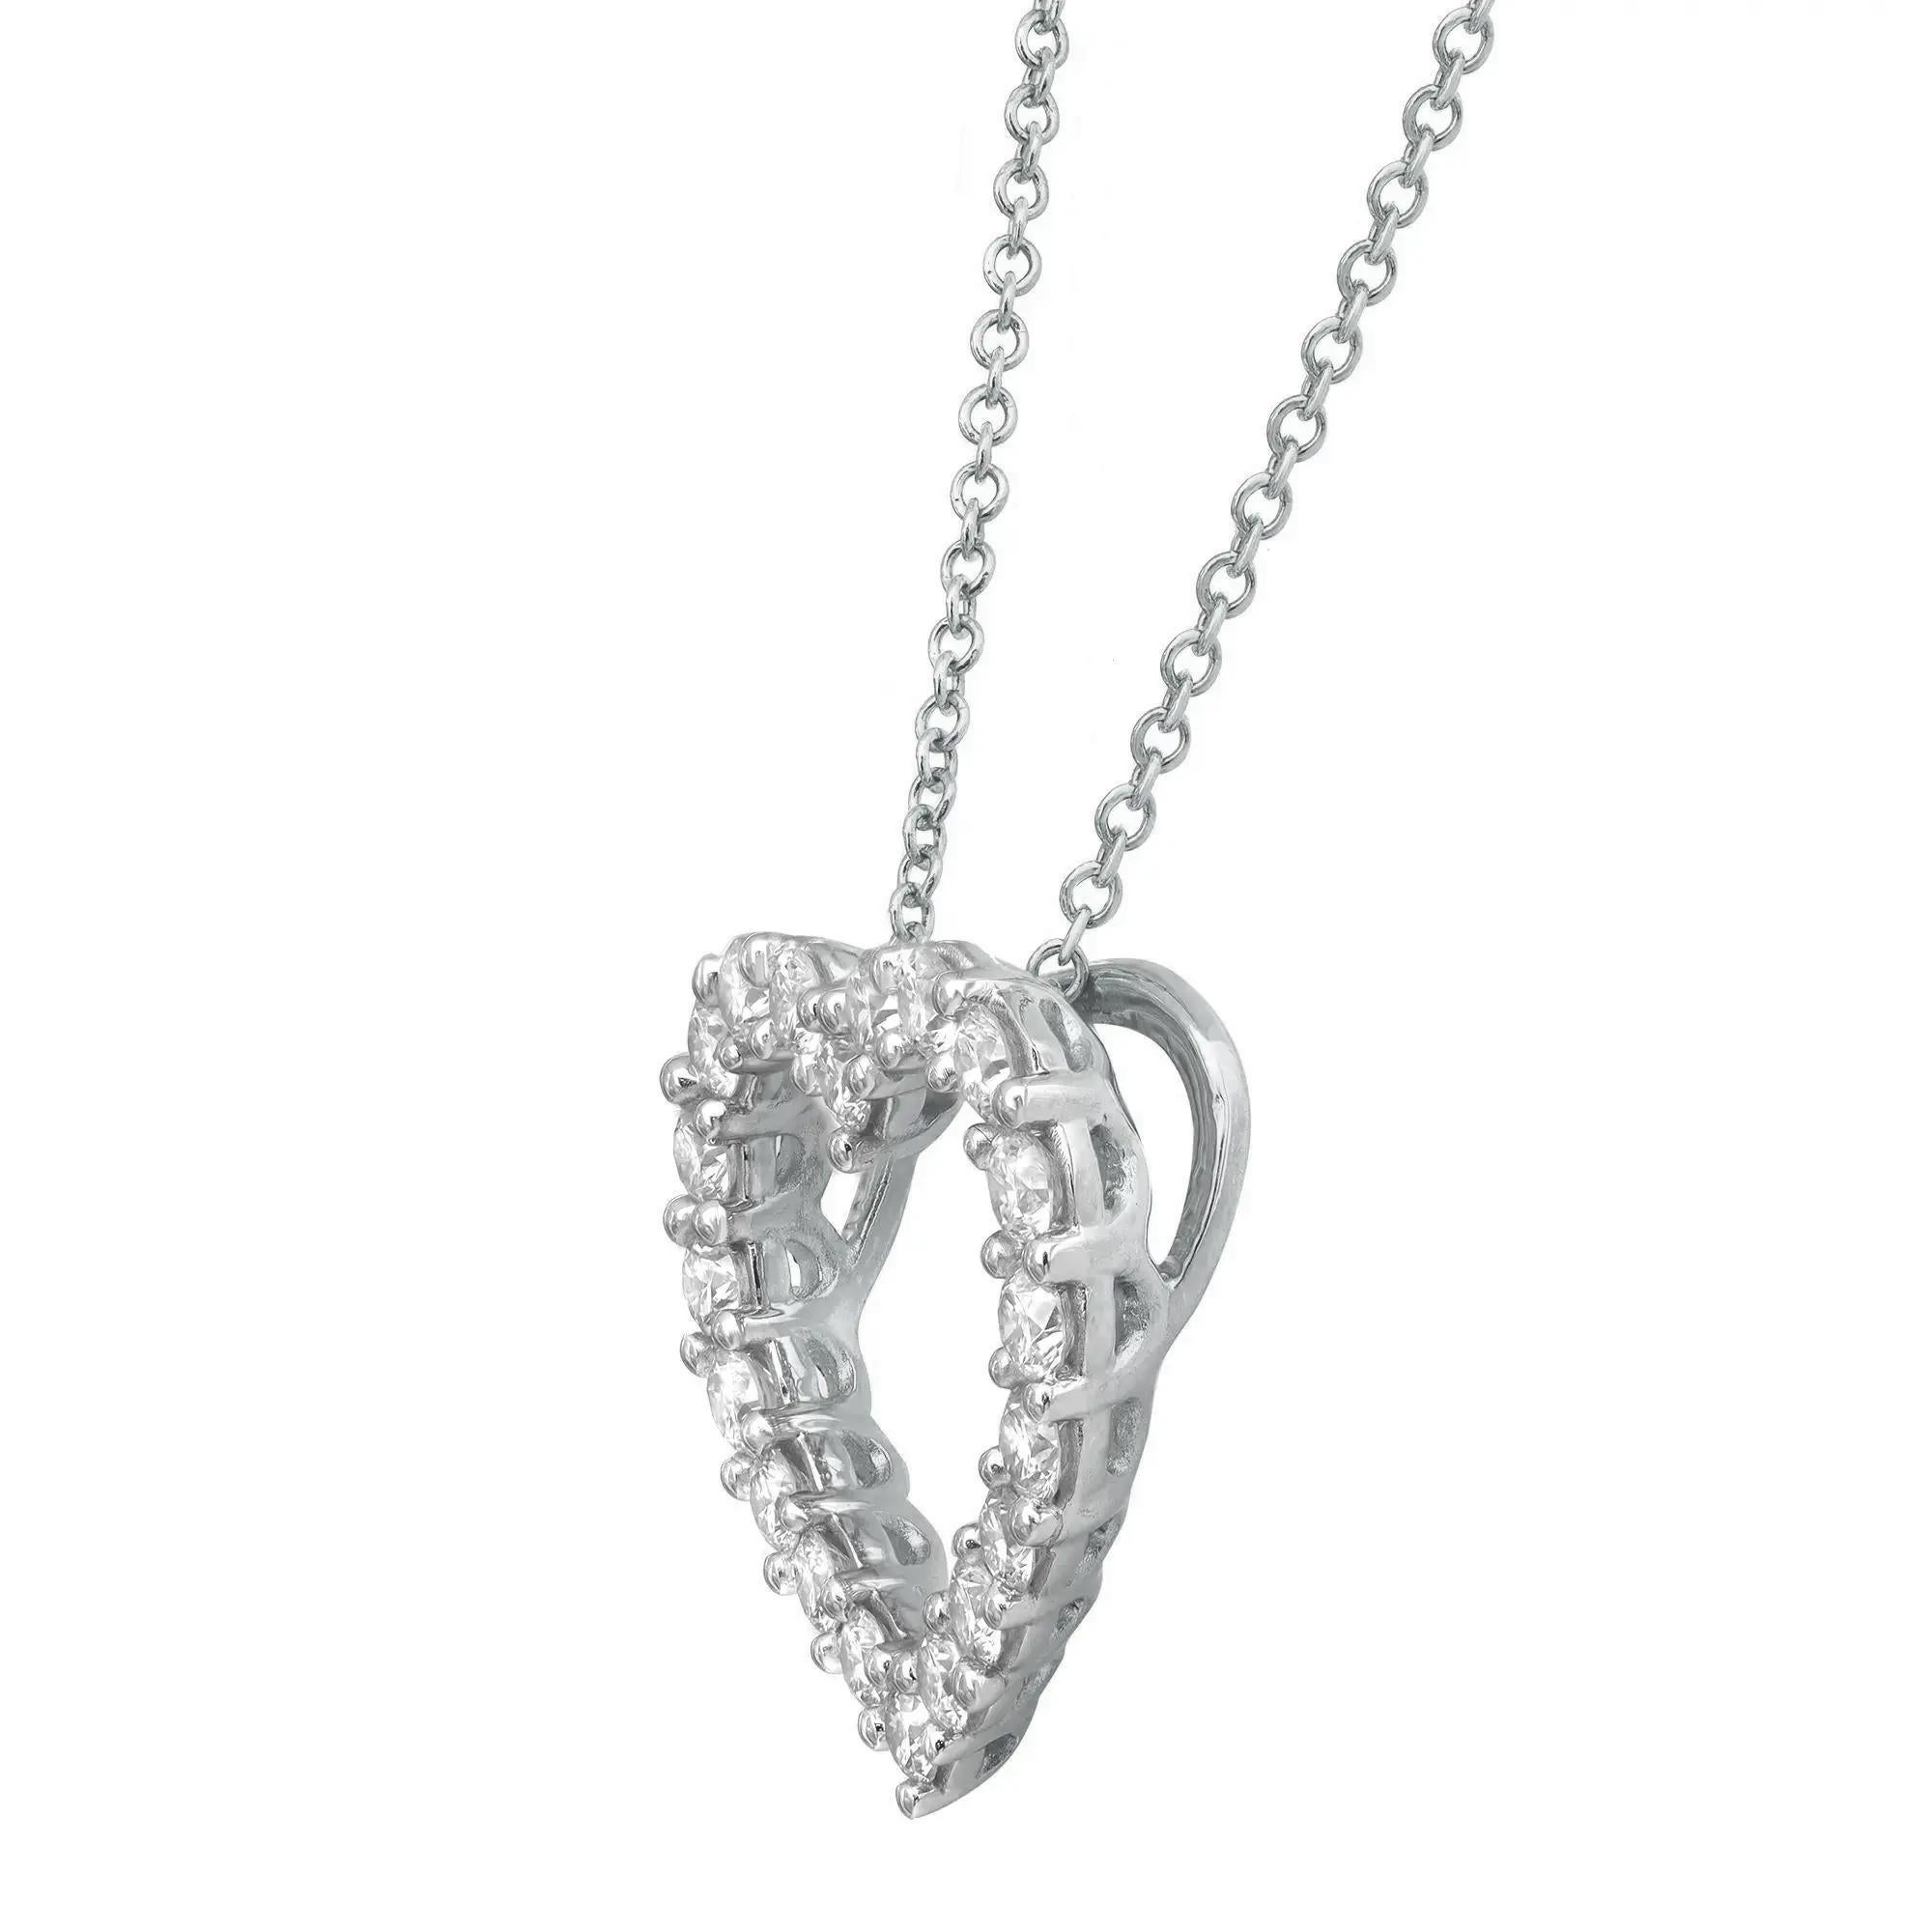 This classic natural diamond heart pendant showcases prong set white sparkling round cut diamonds in a heart-shaped cut out design. Crafted in 14K white gold. Total diamond weight: 1.00 carat. Each diamond is of VS-SI clarity and G-H color. This